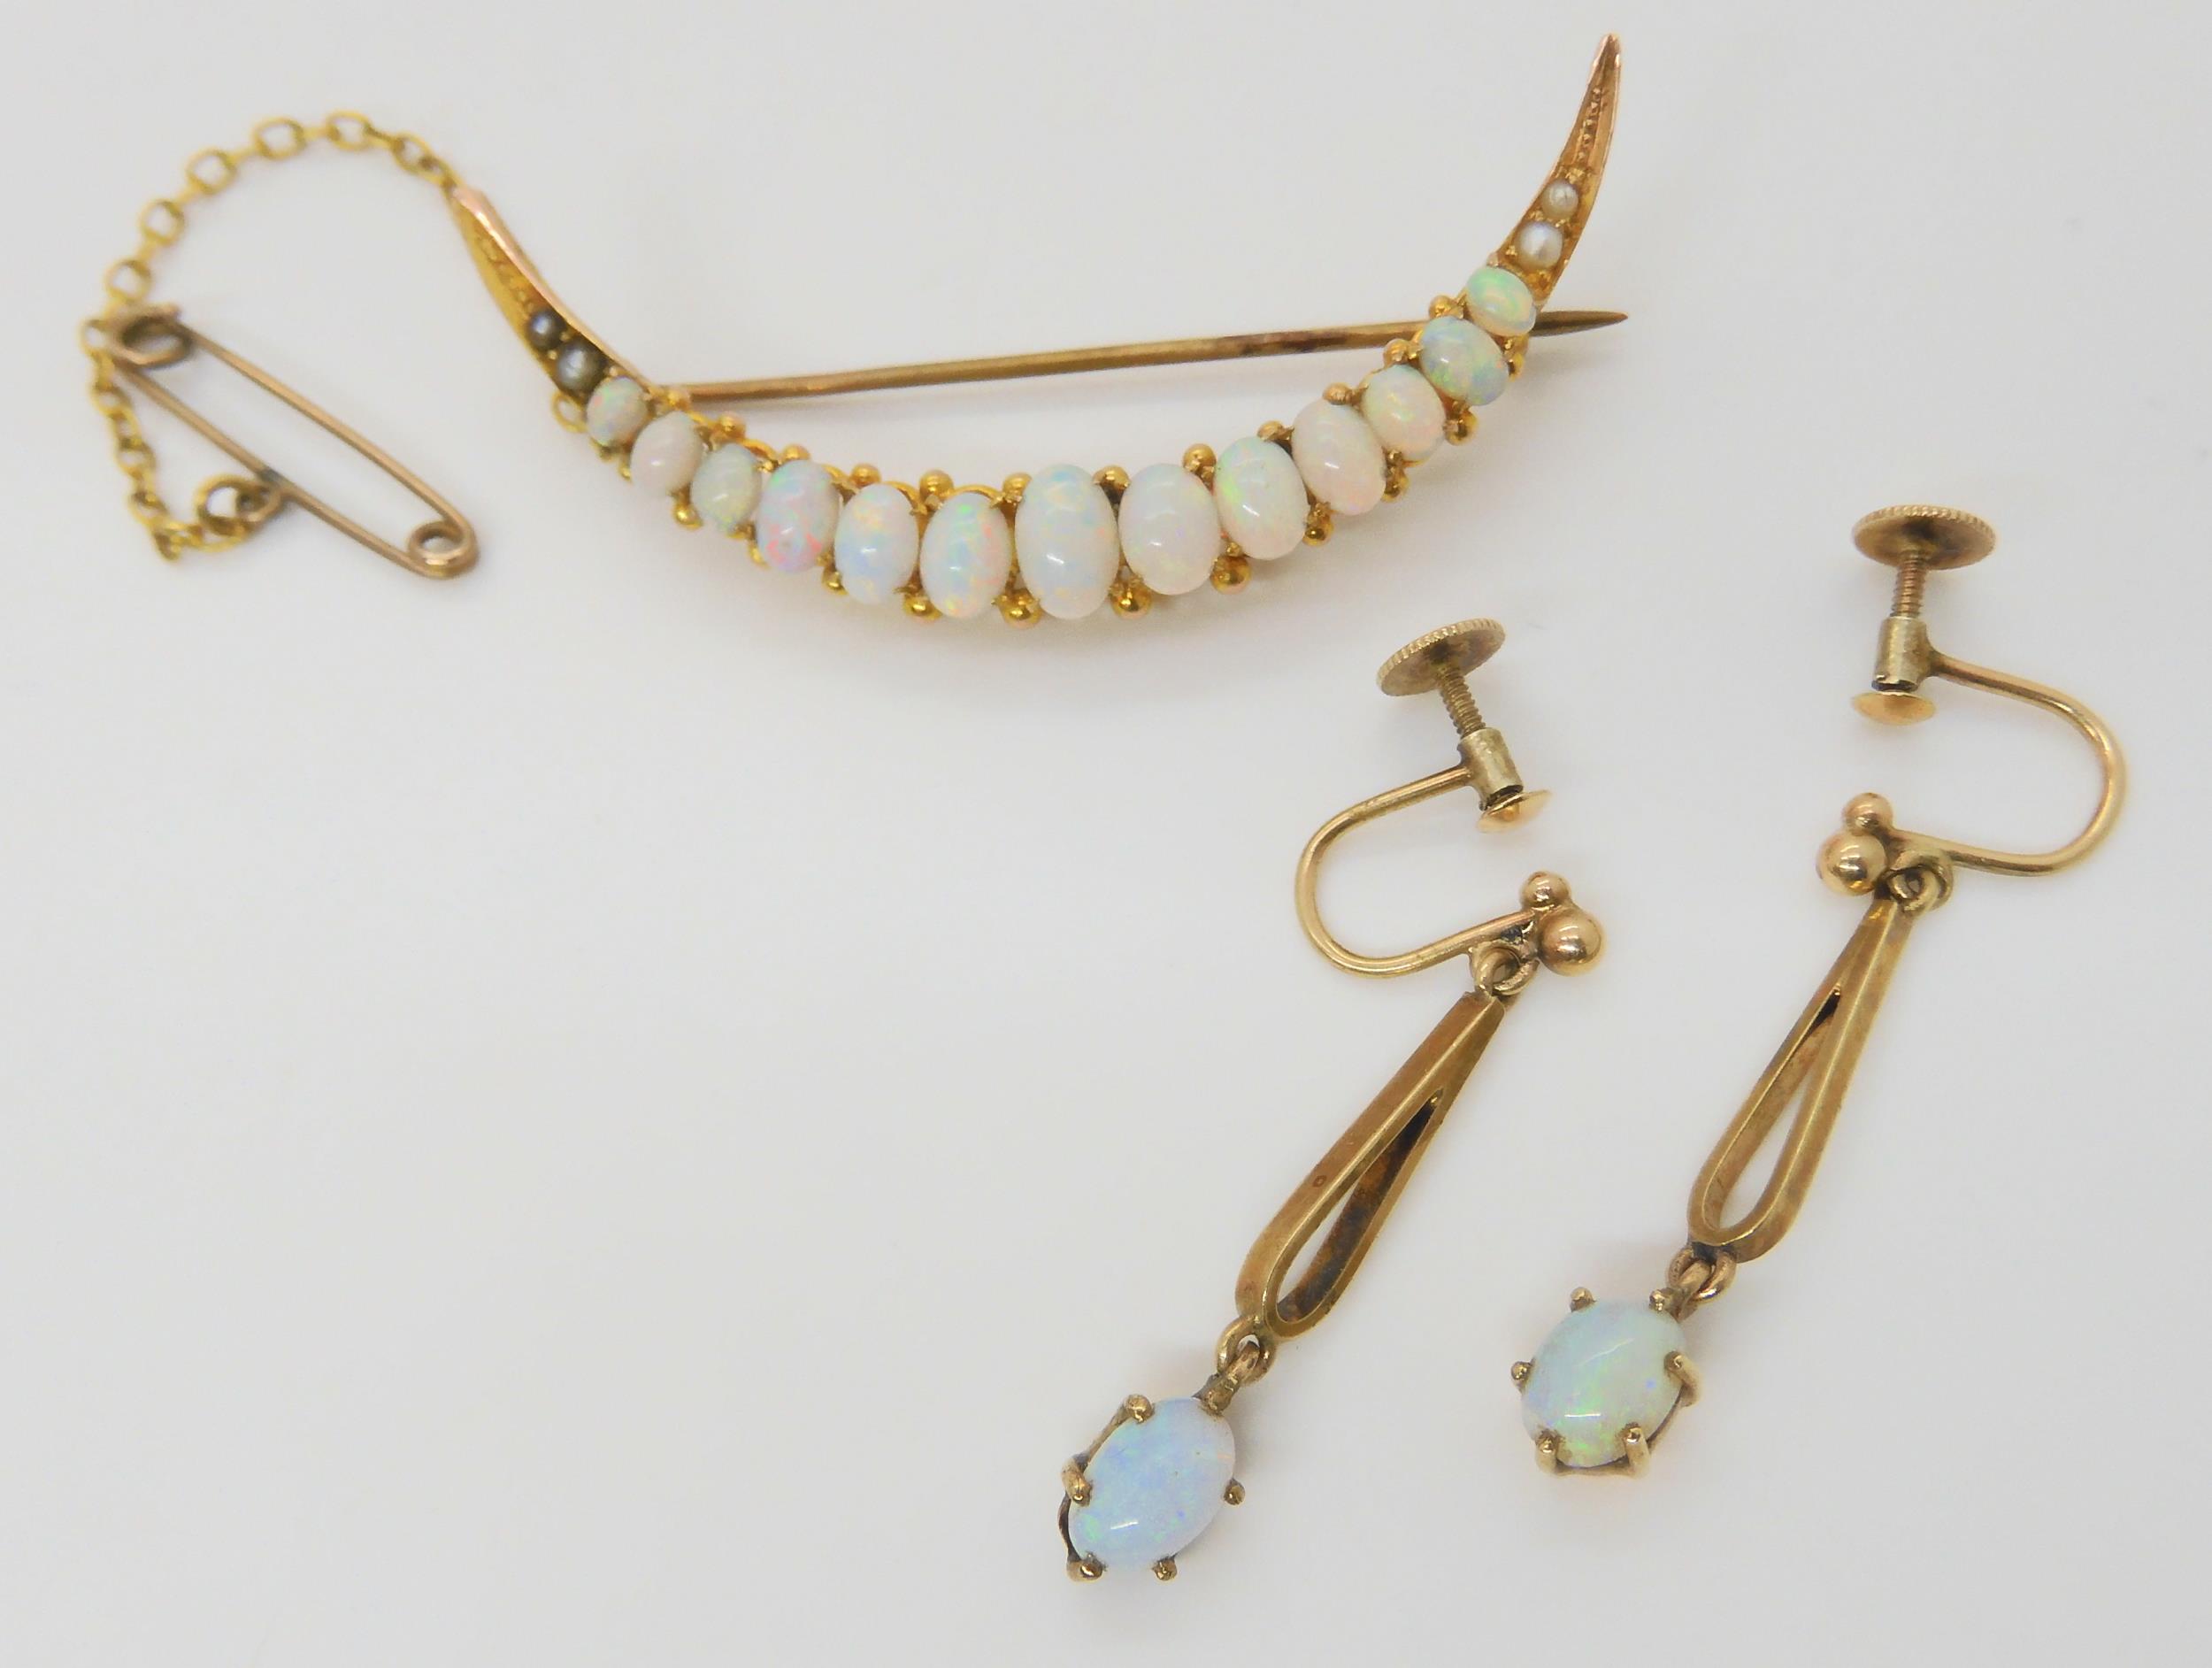 AN OPAL CRESCENT BROOCH & EARRINGS the brooch set with oval cabochon opals, largest approx 6mm x 4mm